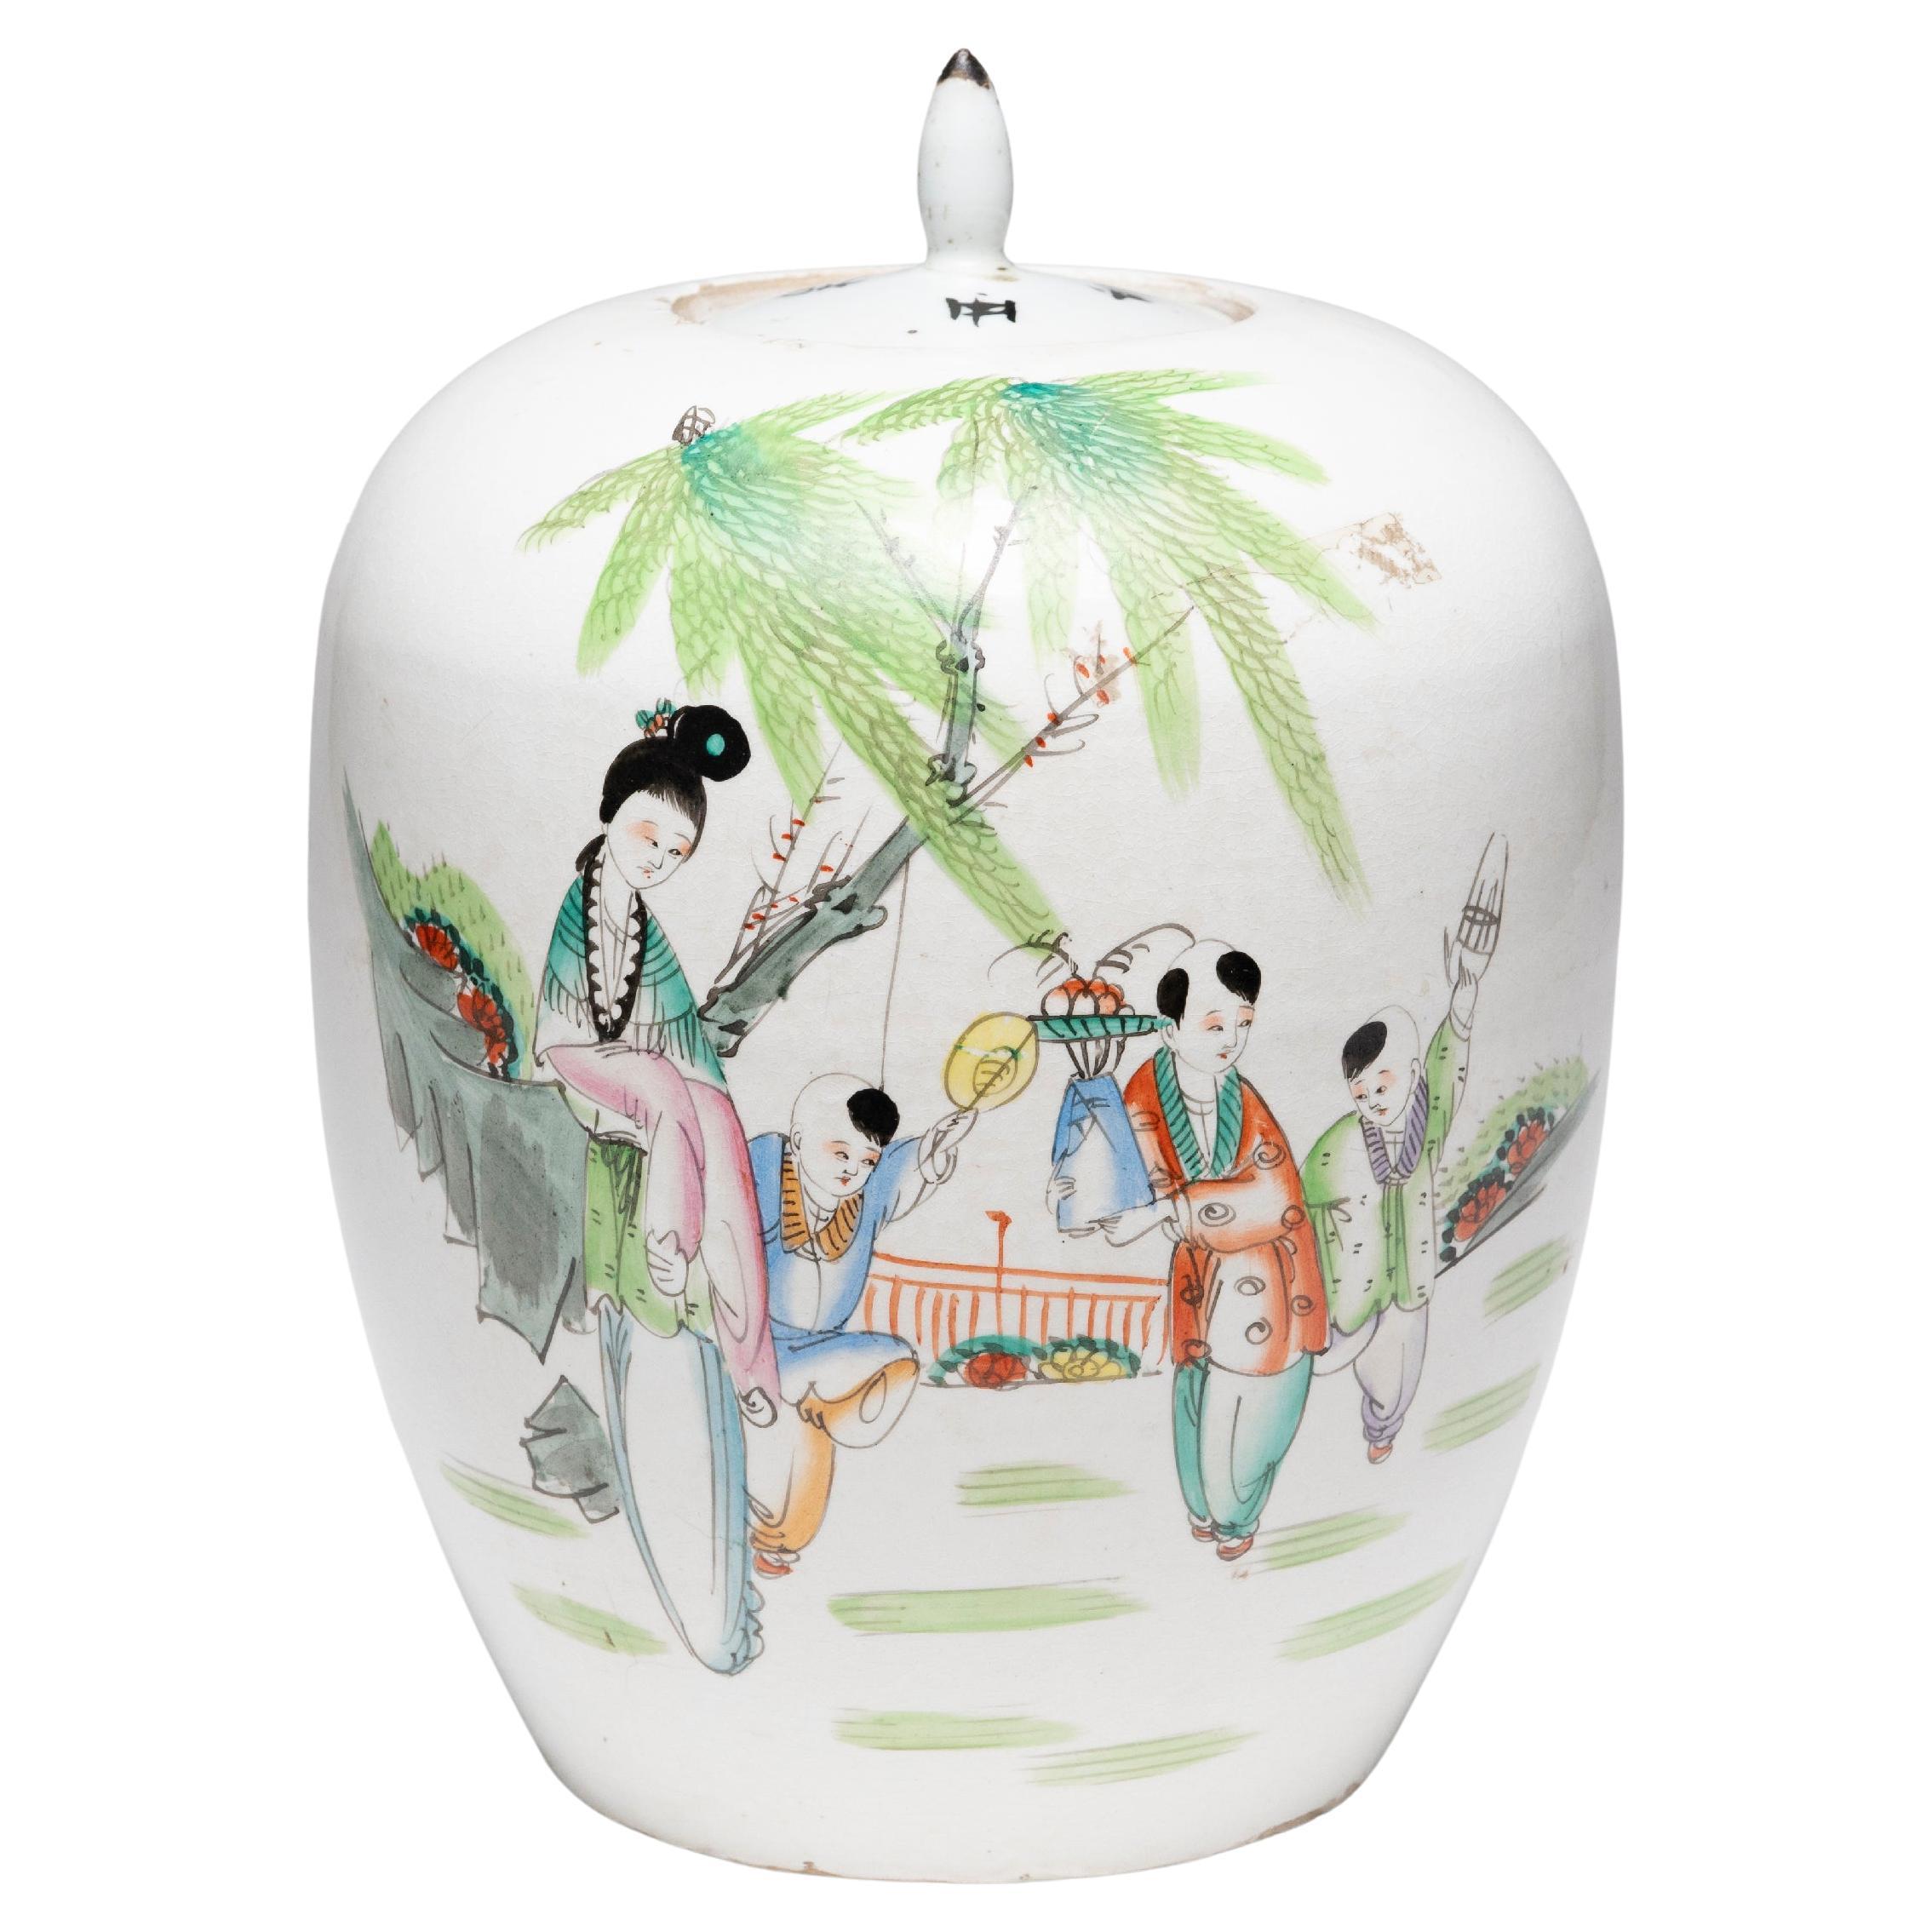 Chinese Enameled Ginger Jar with Children at Play, c. 1900 For Sale